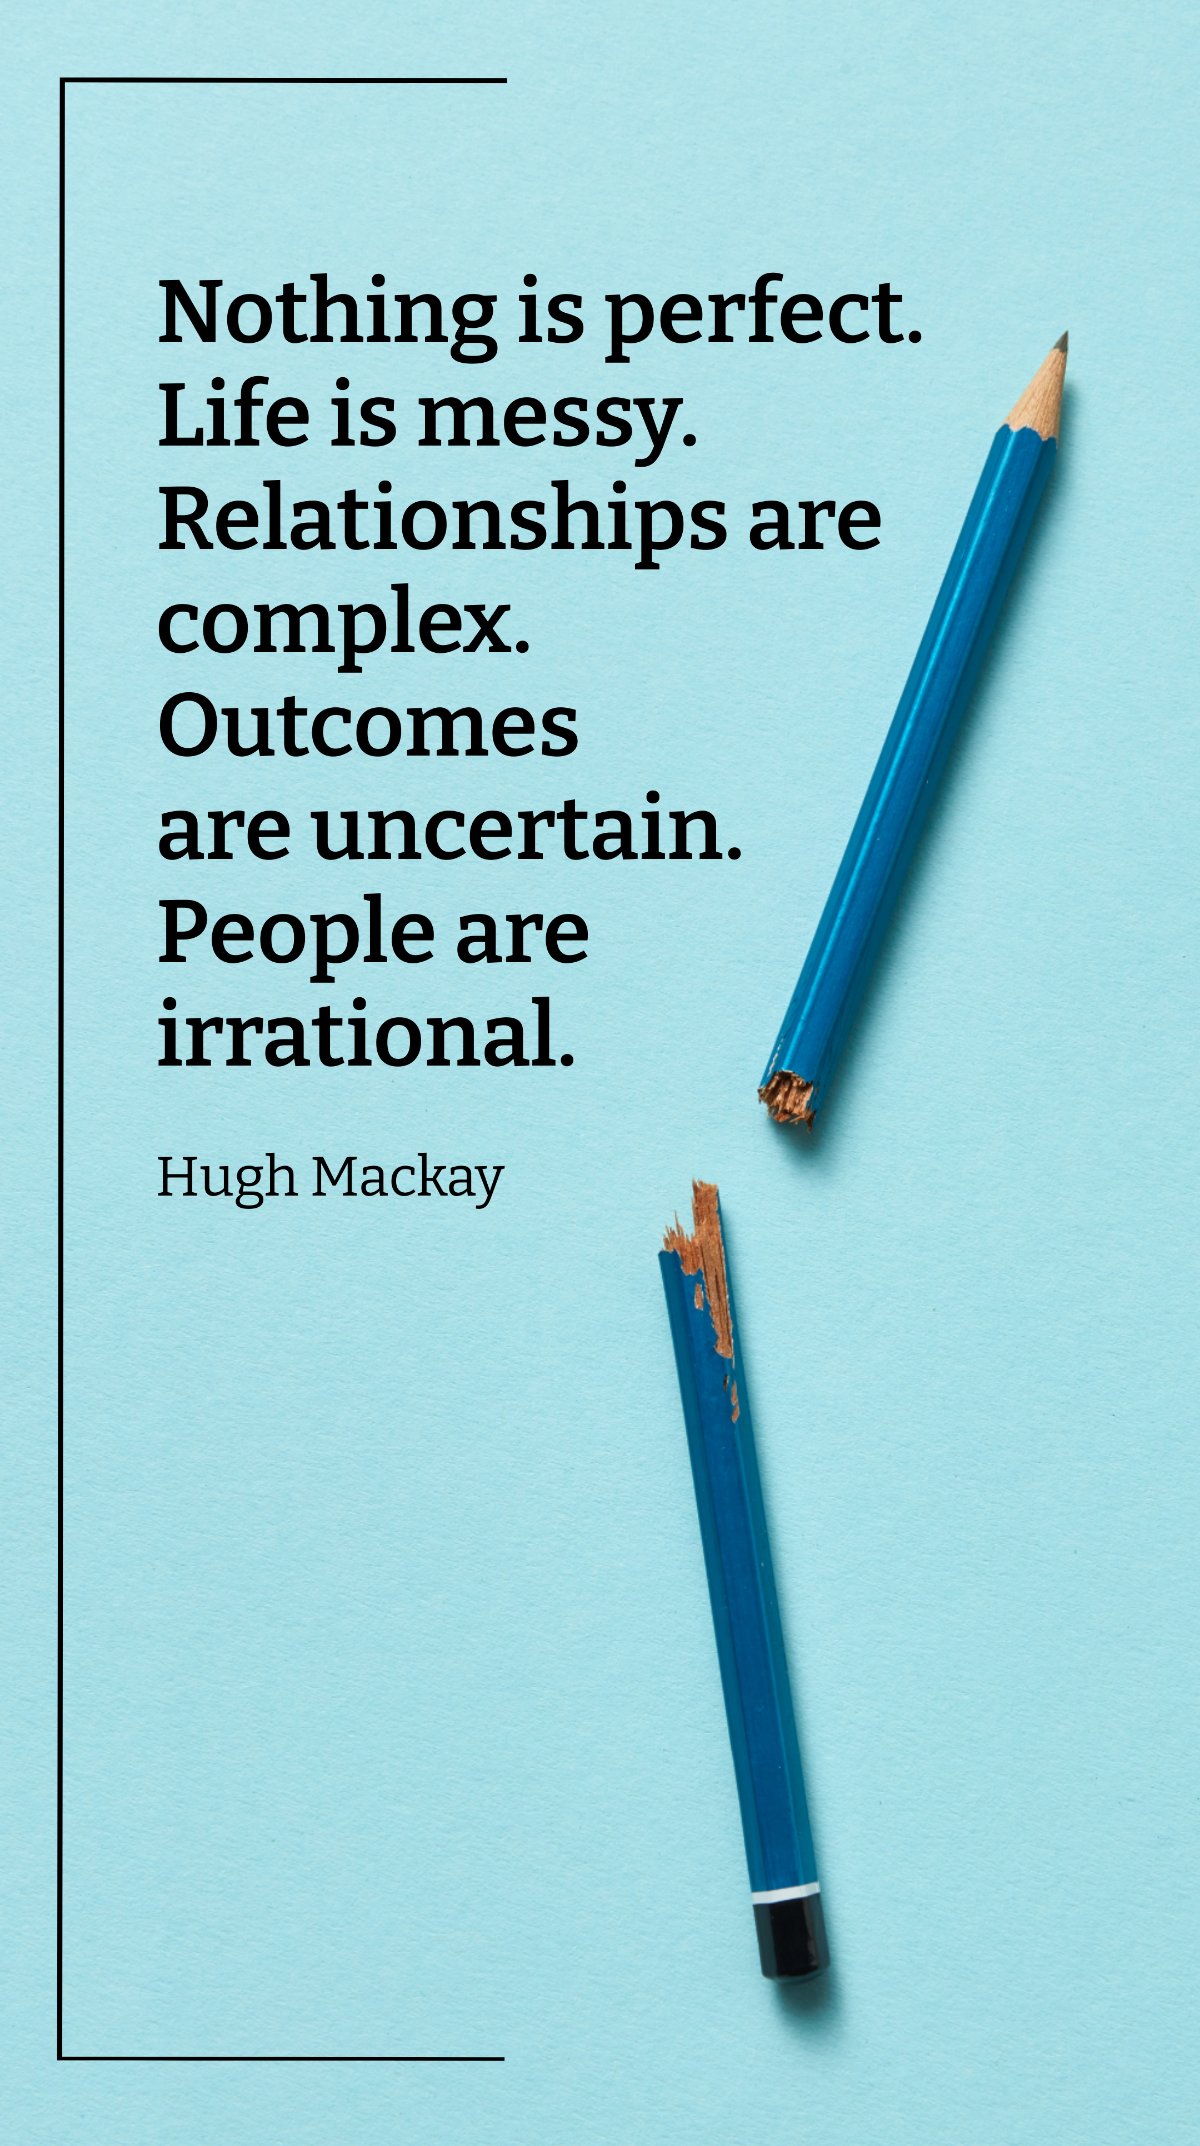 Hugh Mackay - Nothing is perfect. Life is messy. Relationships are complex. Outcomes are uncertain. People are irrational. Template